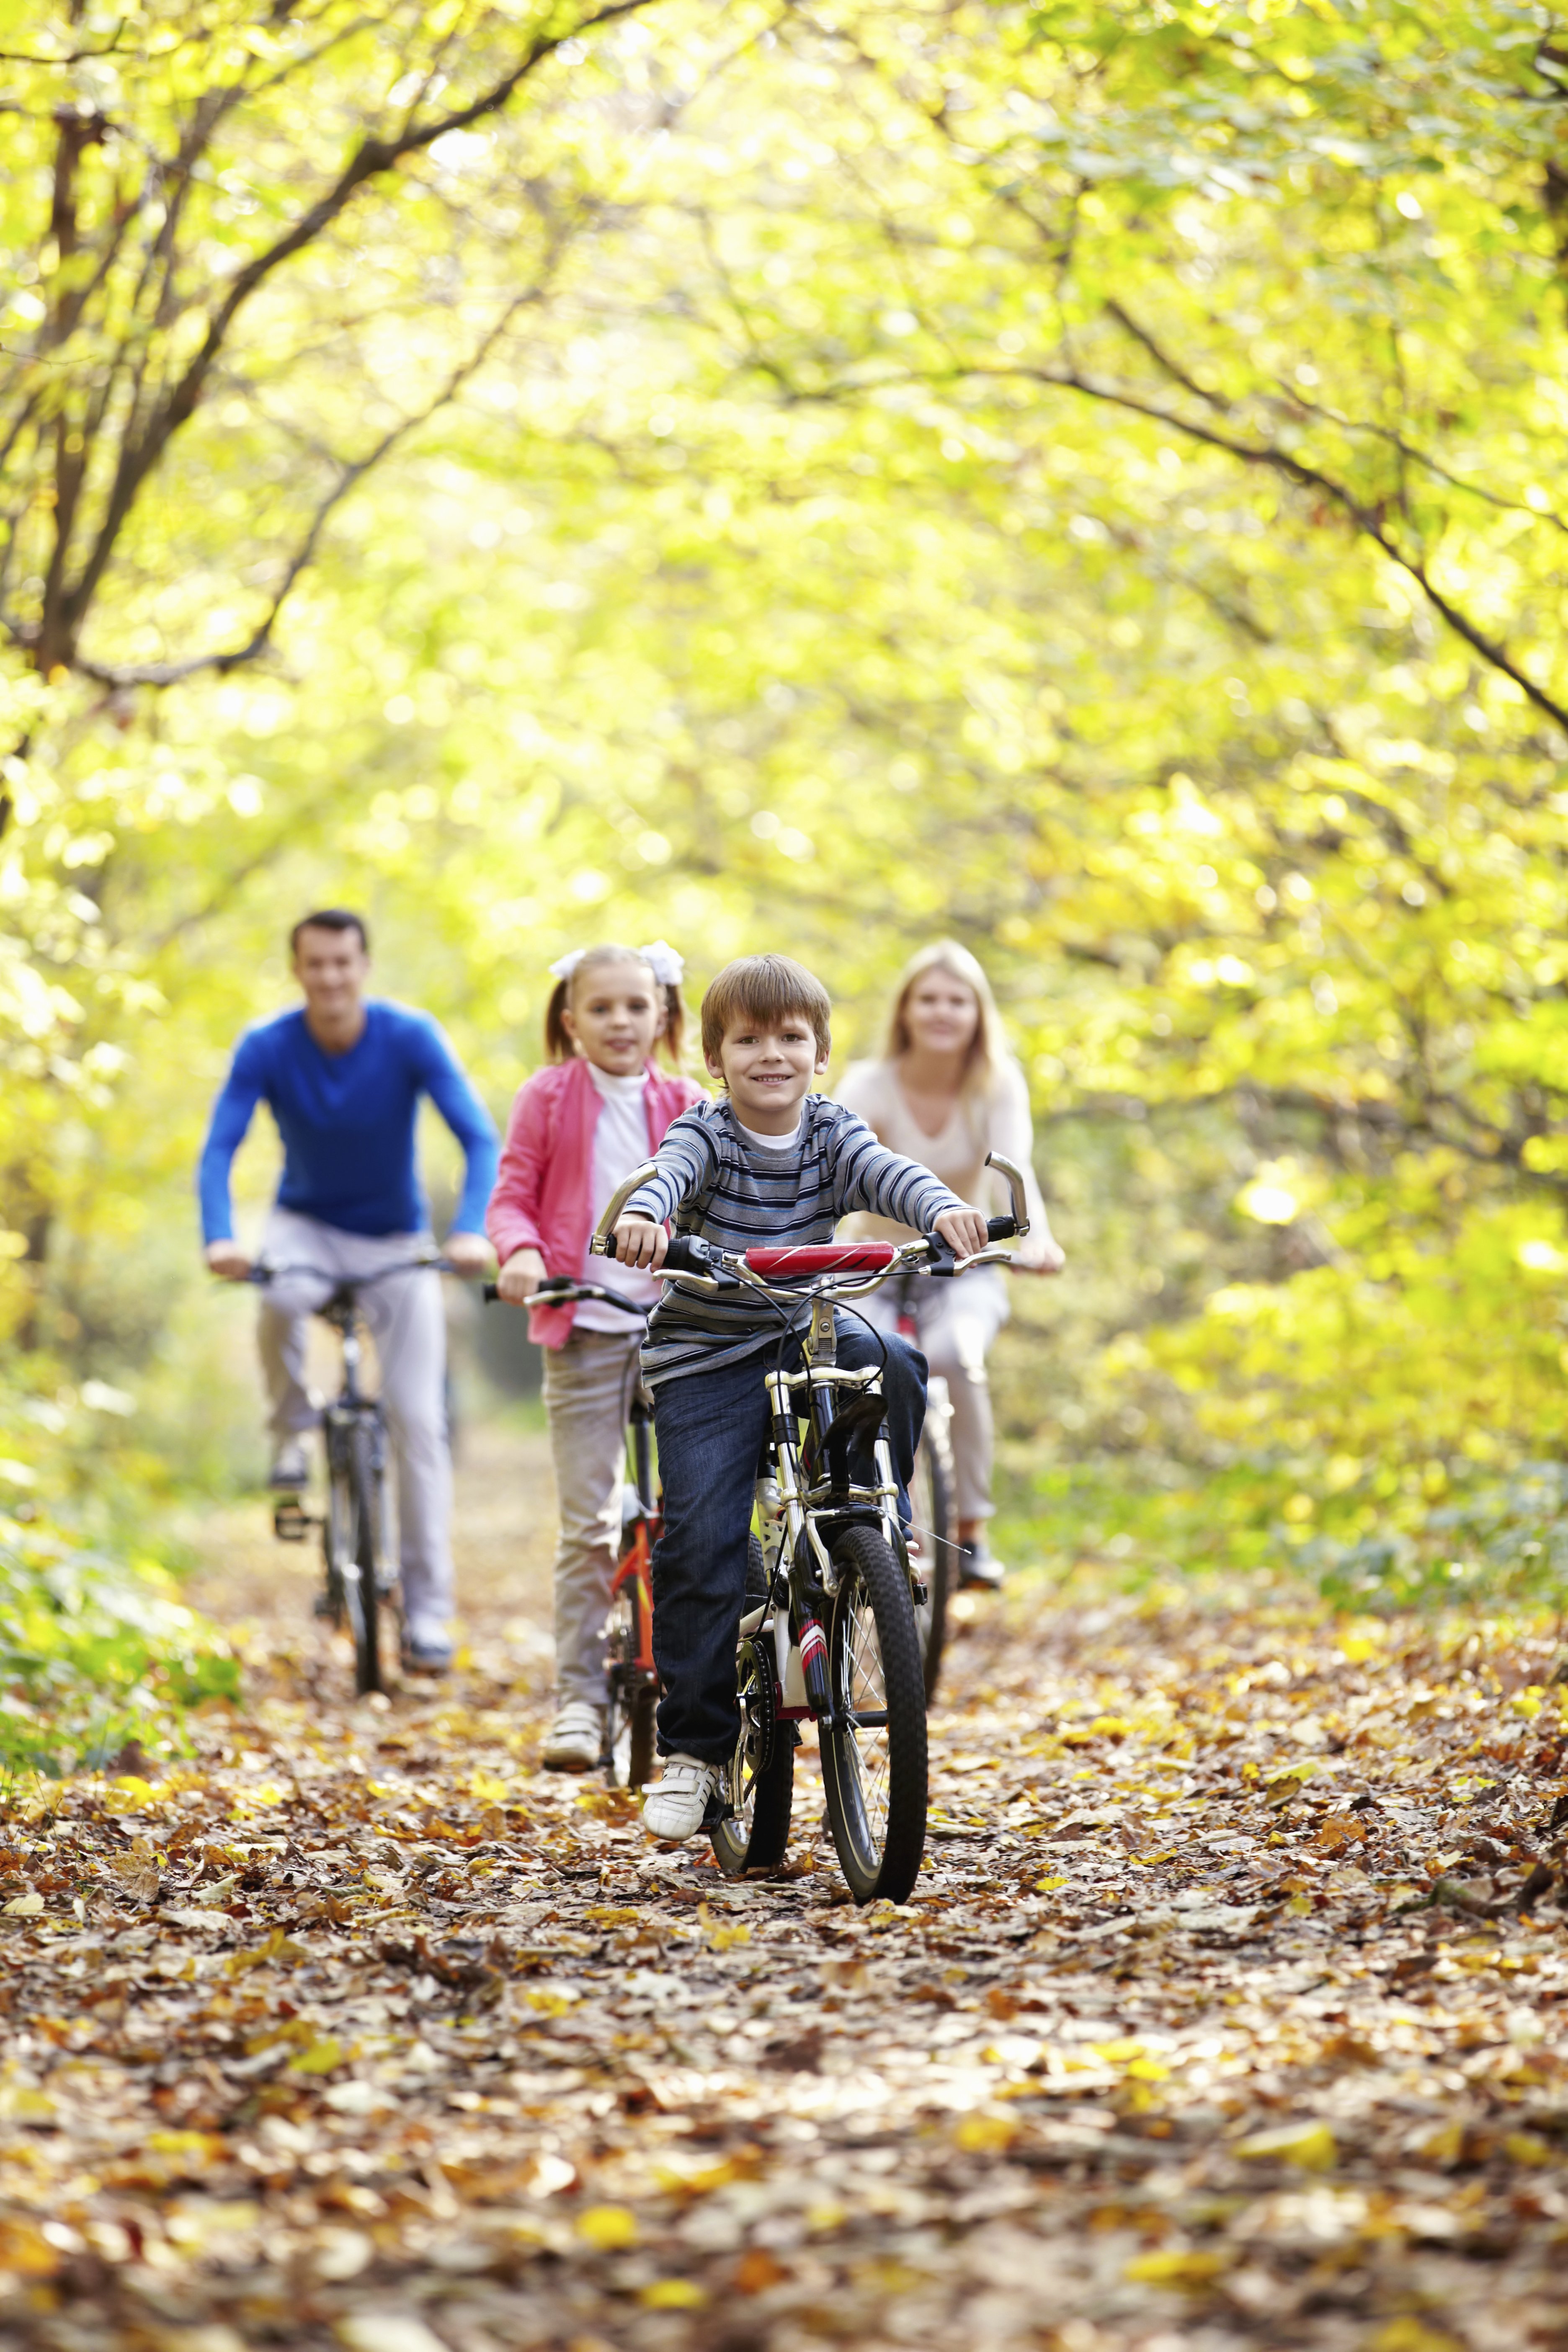 10 Fun Family Activities for Fall